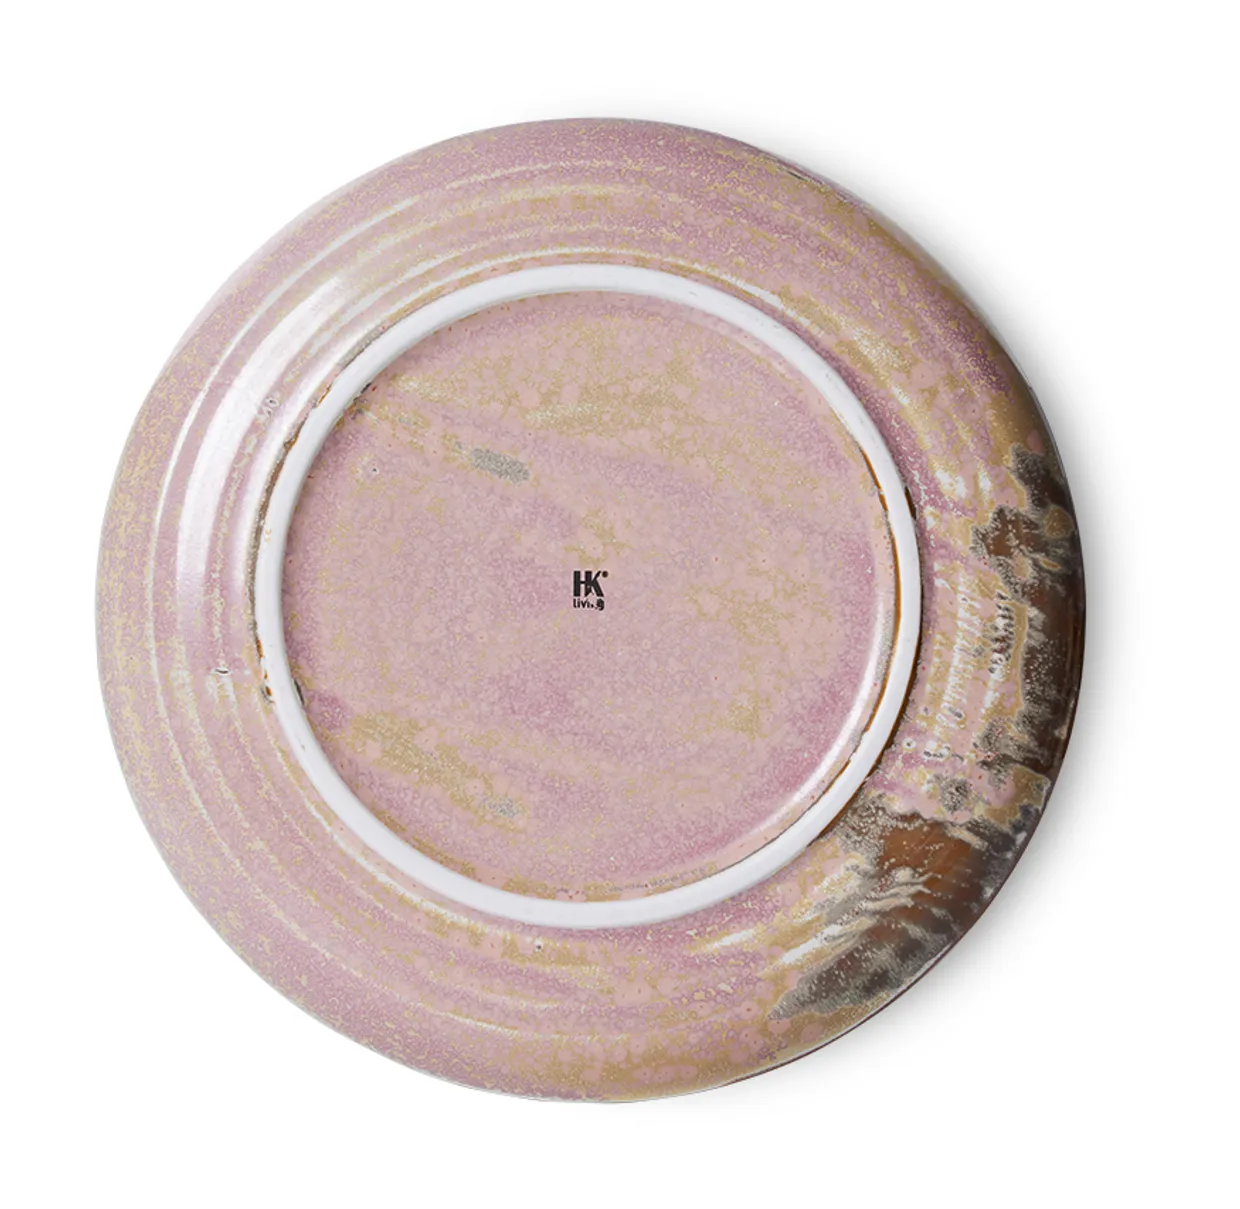 Chef ceramics: side plate, rustic pink